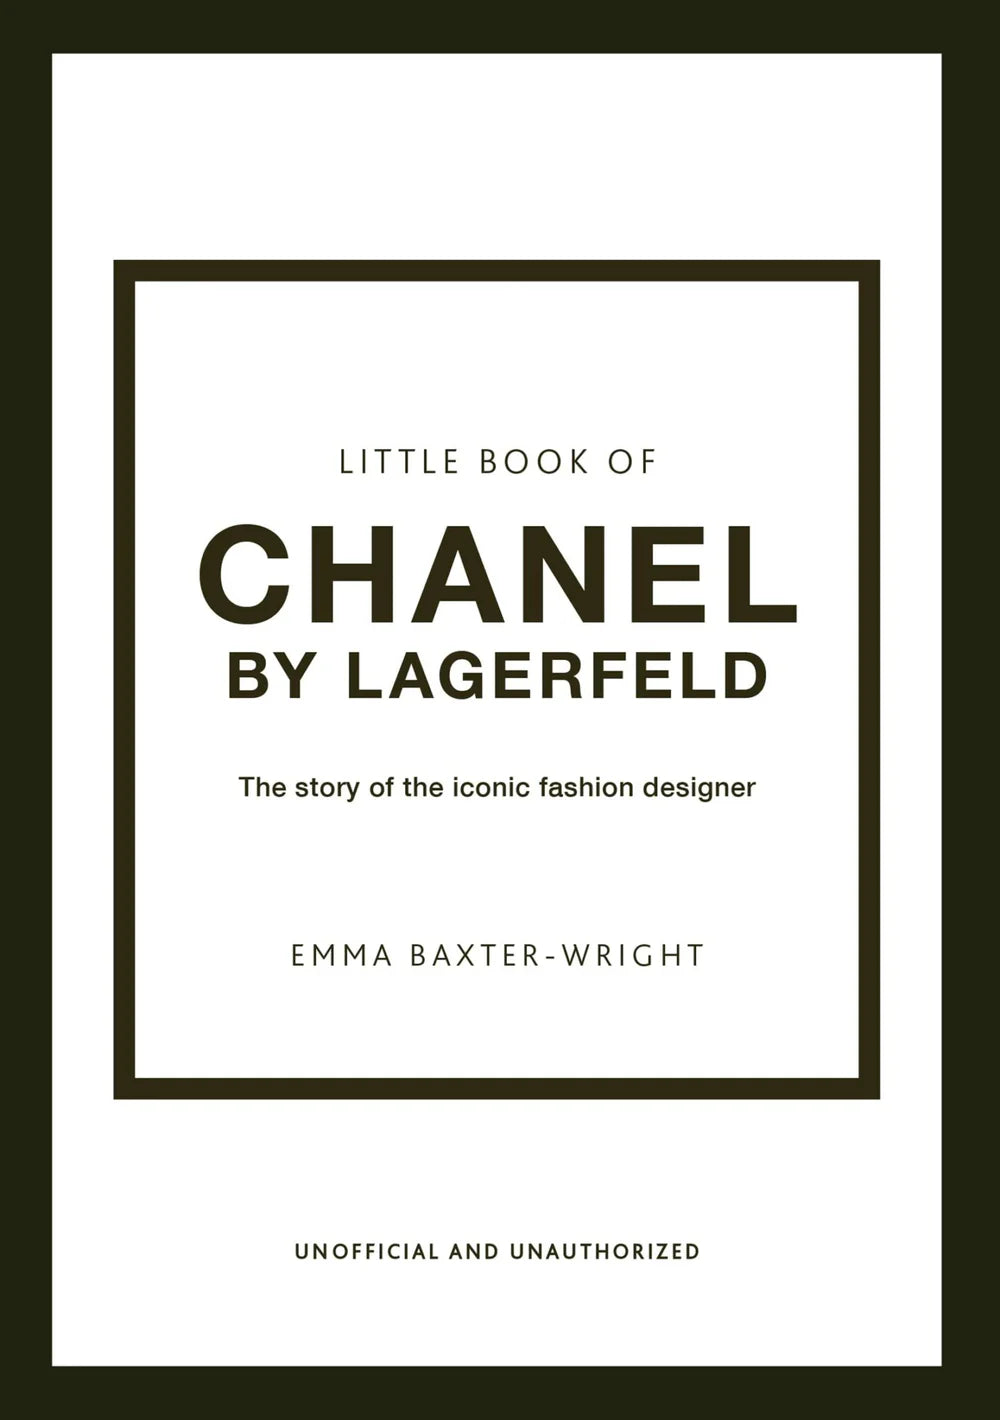 THE LITTLE BOOK OF CHANEL BY LAGERFELD